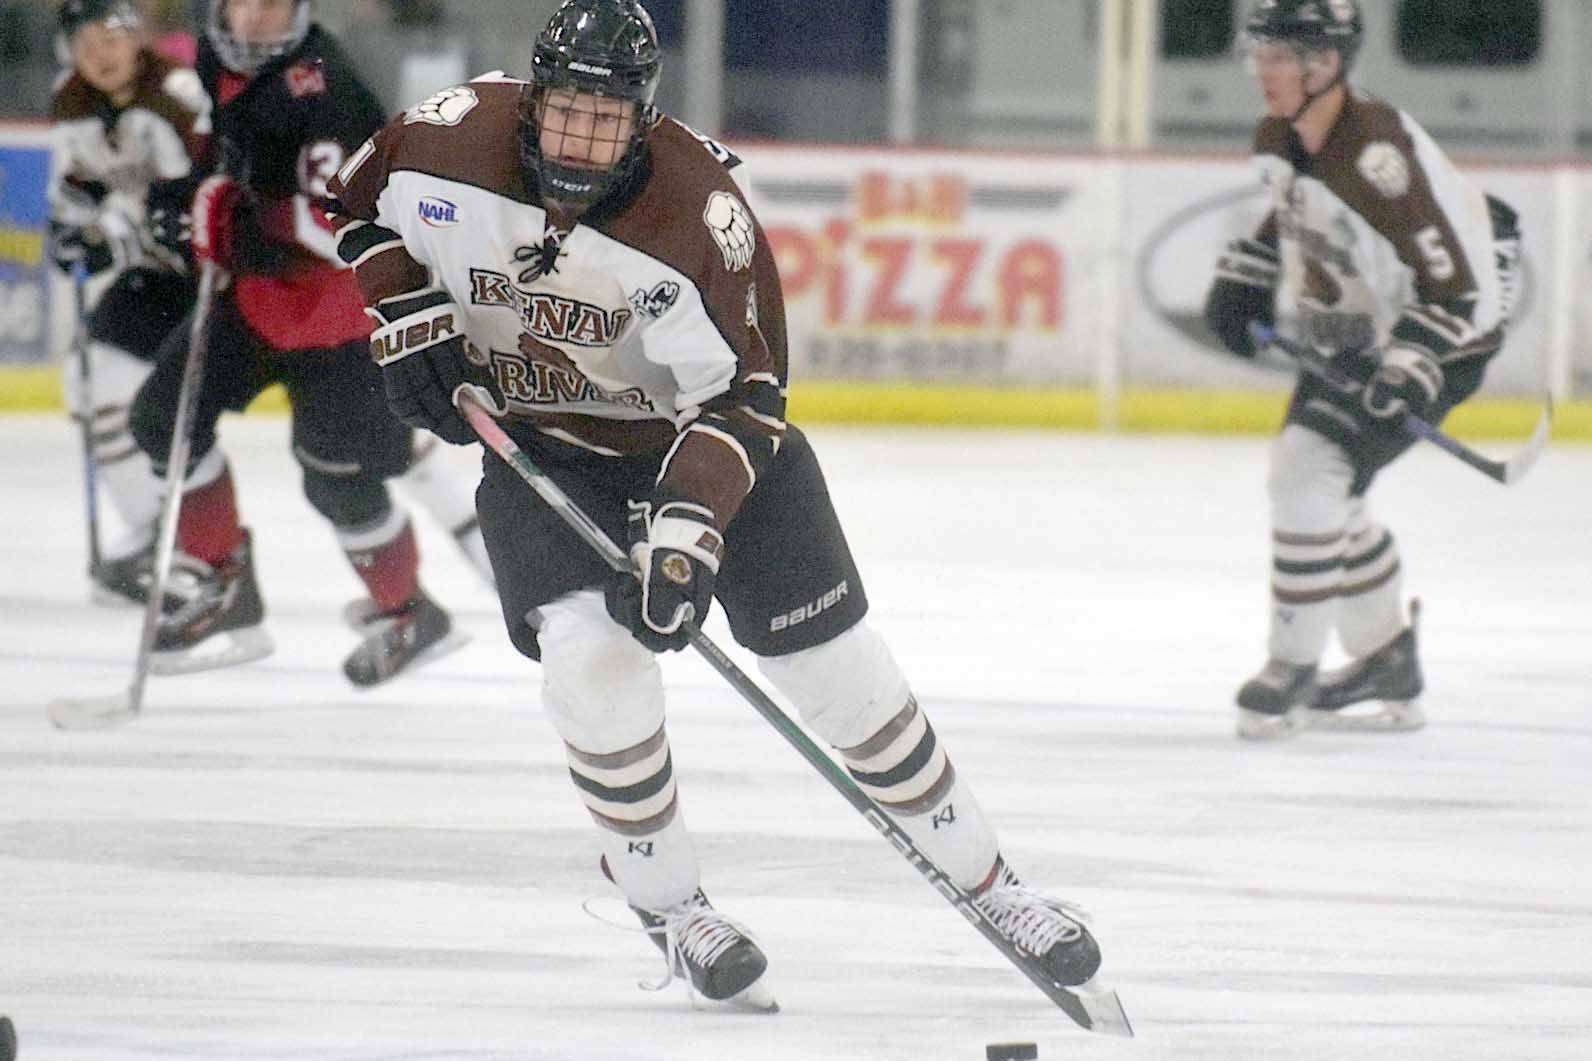 Kenai River Brown Bears forward Porter Schachle brings the puck up the ice Friday, Nov. 9, 2018, against the Minnesota Magicians at the Soldotna Regional Sports Complex. (Photo by Jeff Helminiak/Peninsula Clarion)